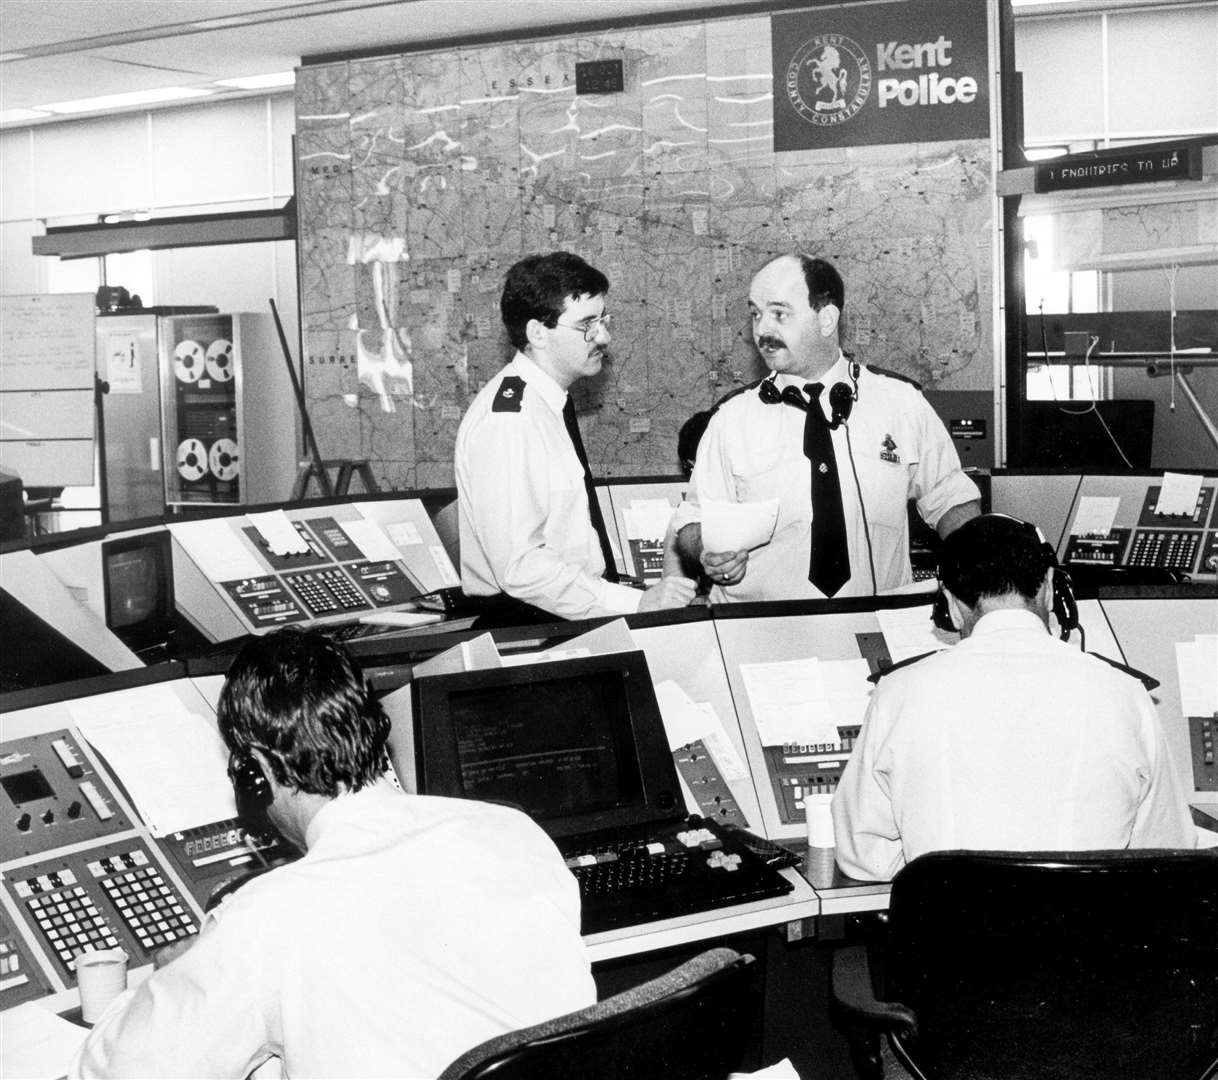 A photograph taken of the control room inside the Kent Police headquarters in 1987